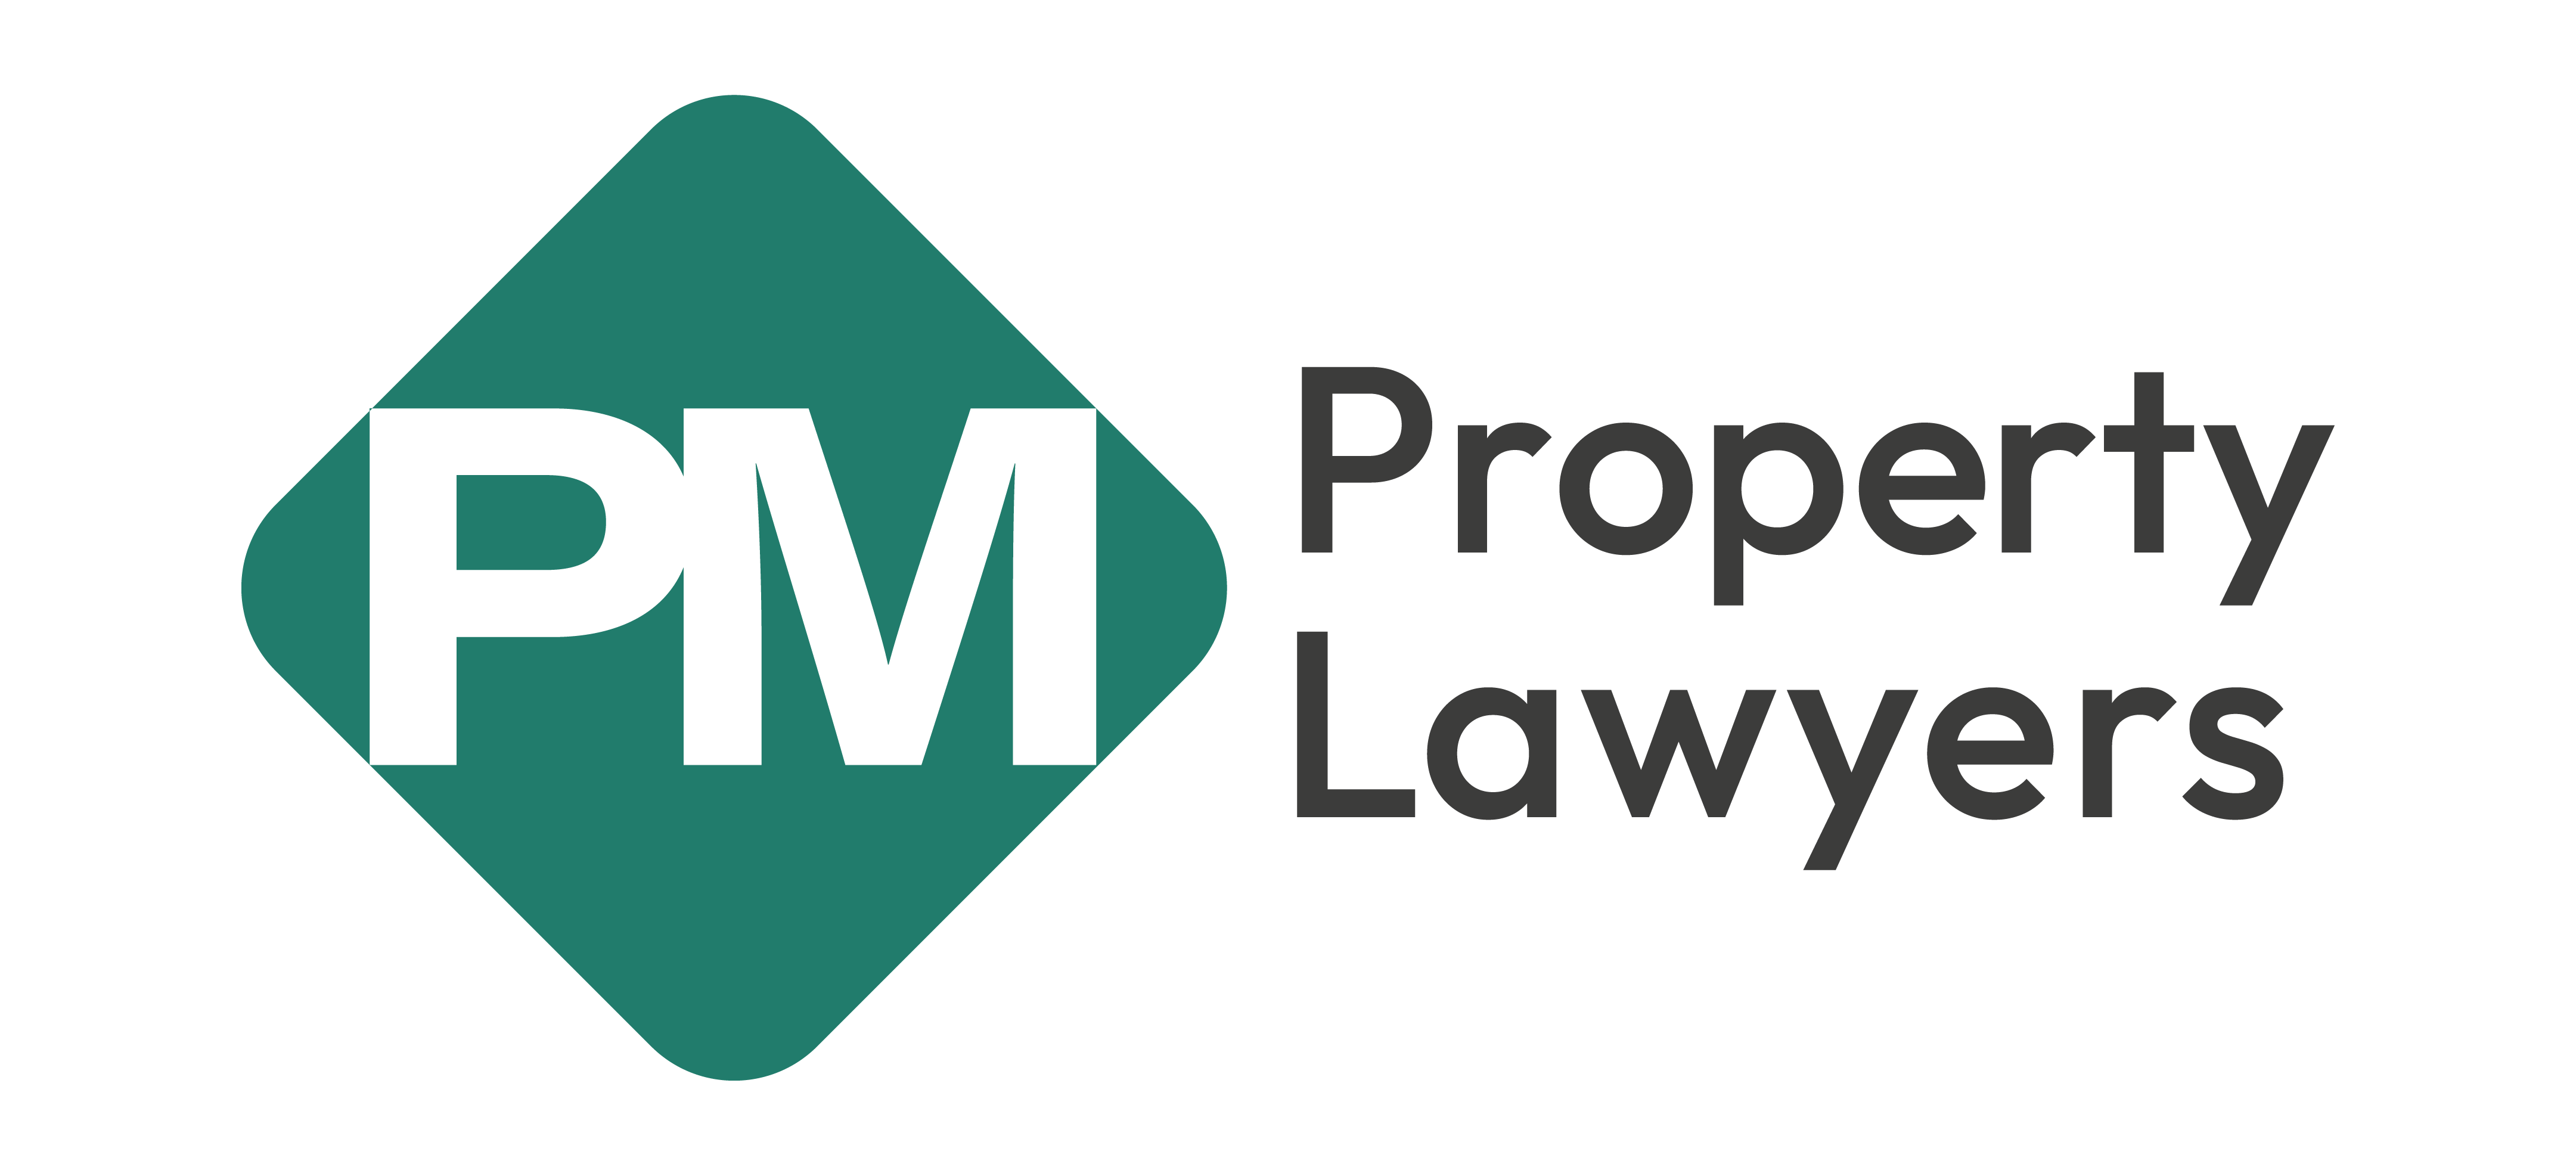 PM Property Lawyers launch property logbooks in partnership with Chimni